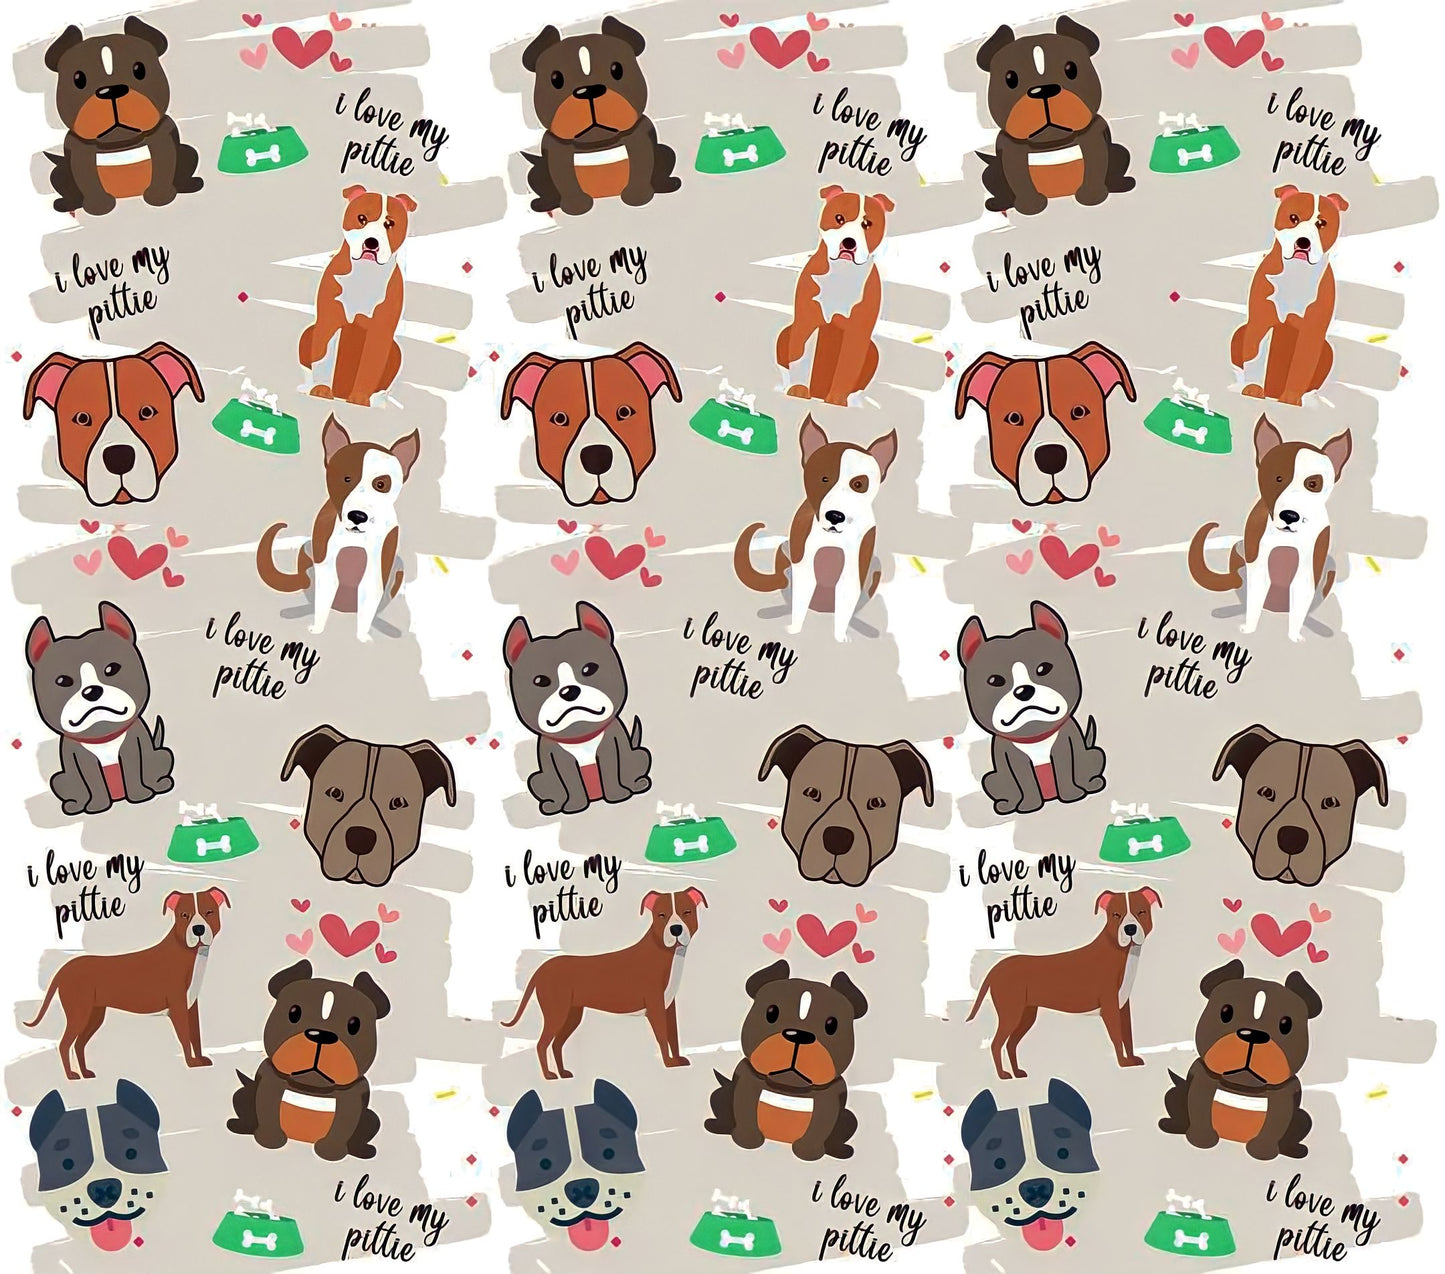 American Bull Dog Appreciation - Cartoon - "I Love My Pittie" - Assorted Colored Dogs w/ Silver Background - 20 Oz Sublimation Transfer